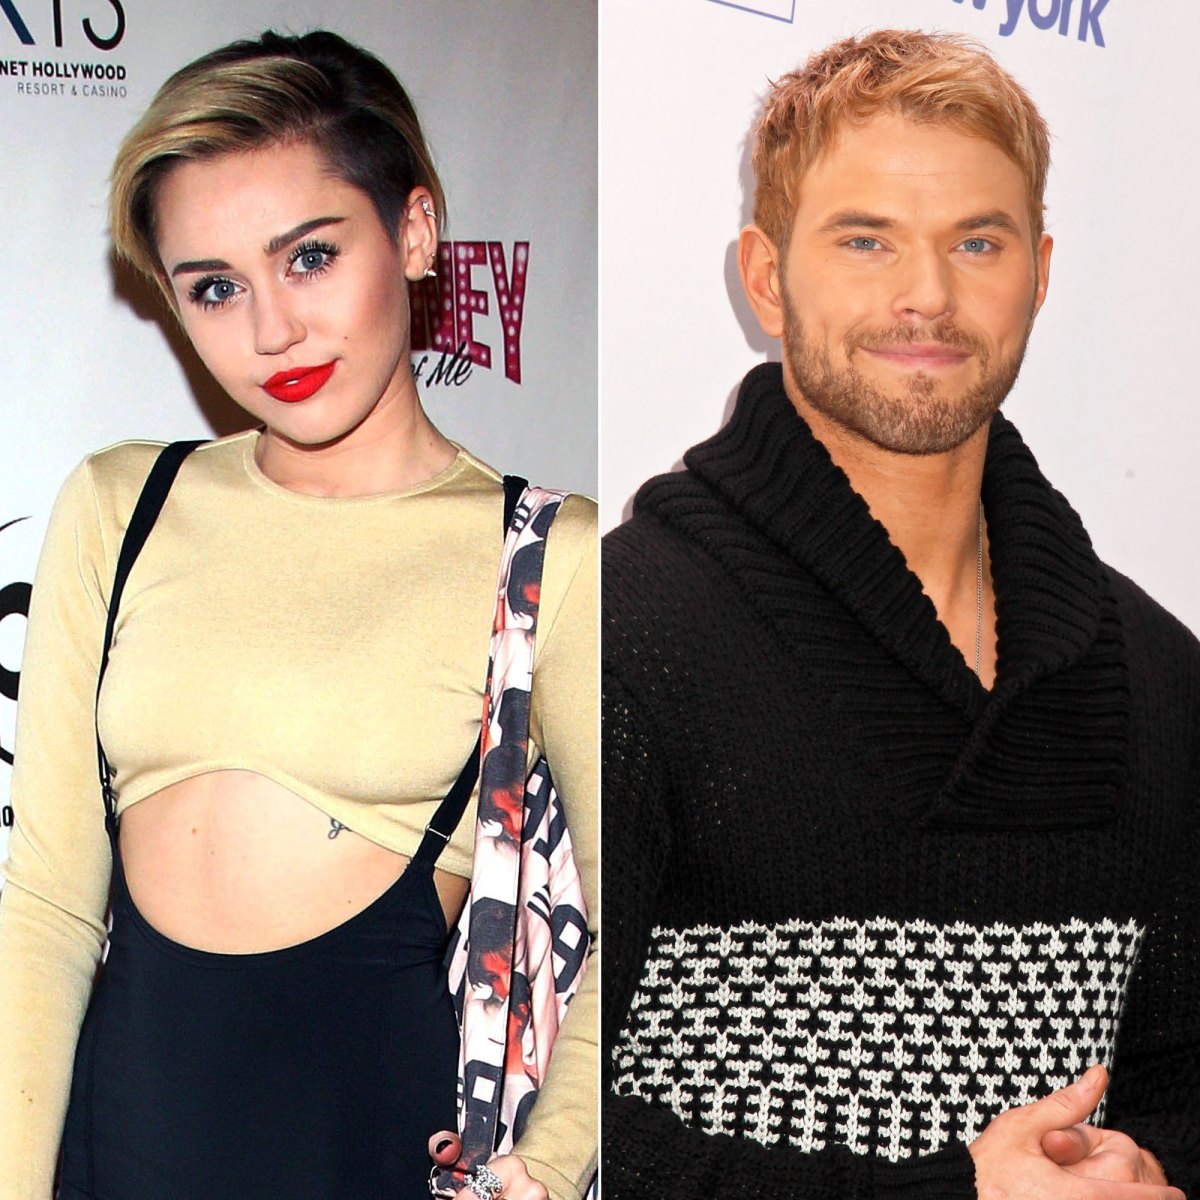 Miley Cyrus Lesbian Strapon Porn - Miley Cyrus' Dating History: Timeline of Her Famous Exes, Flings